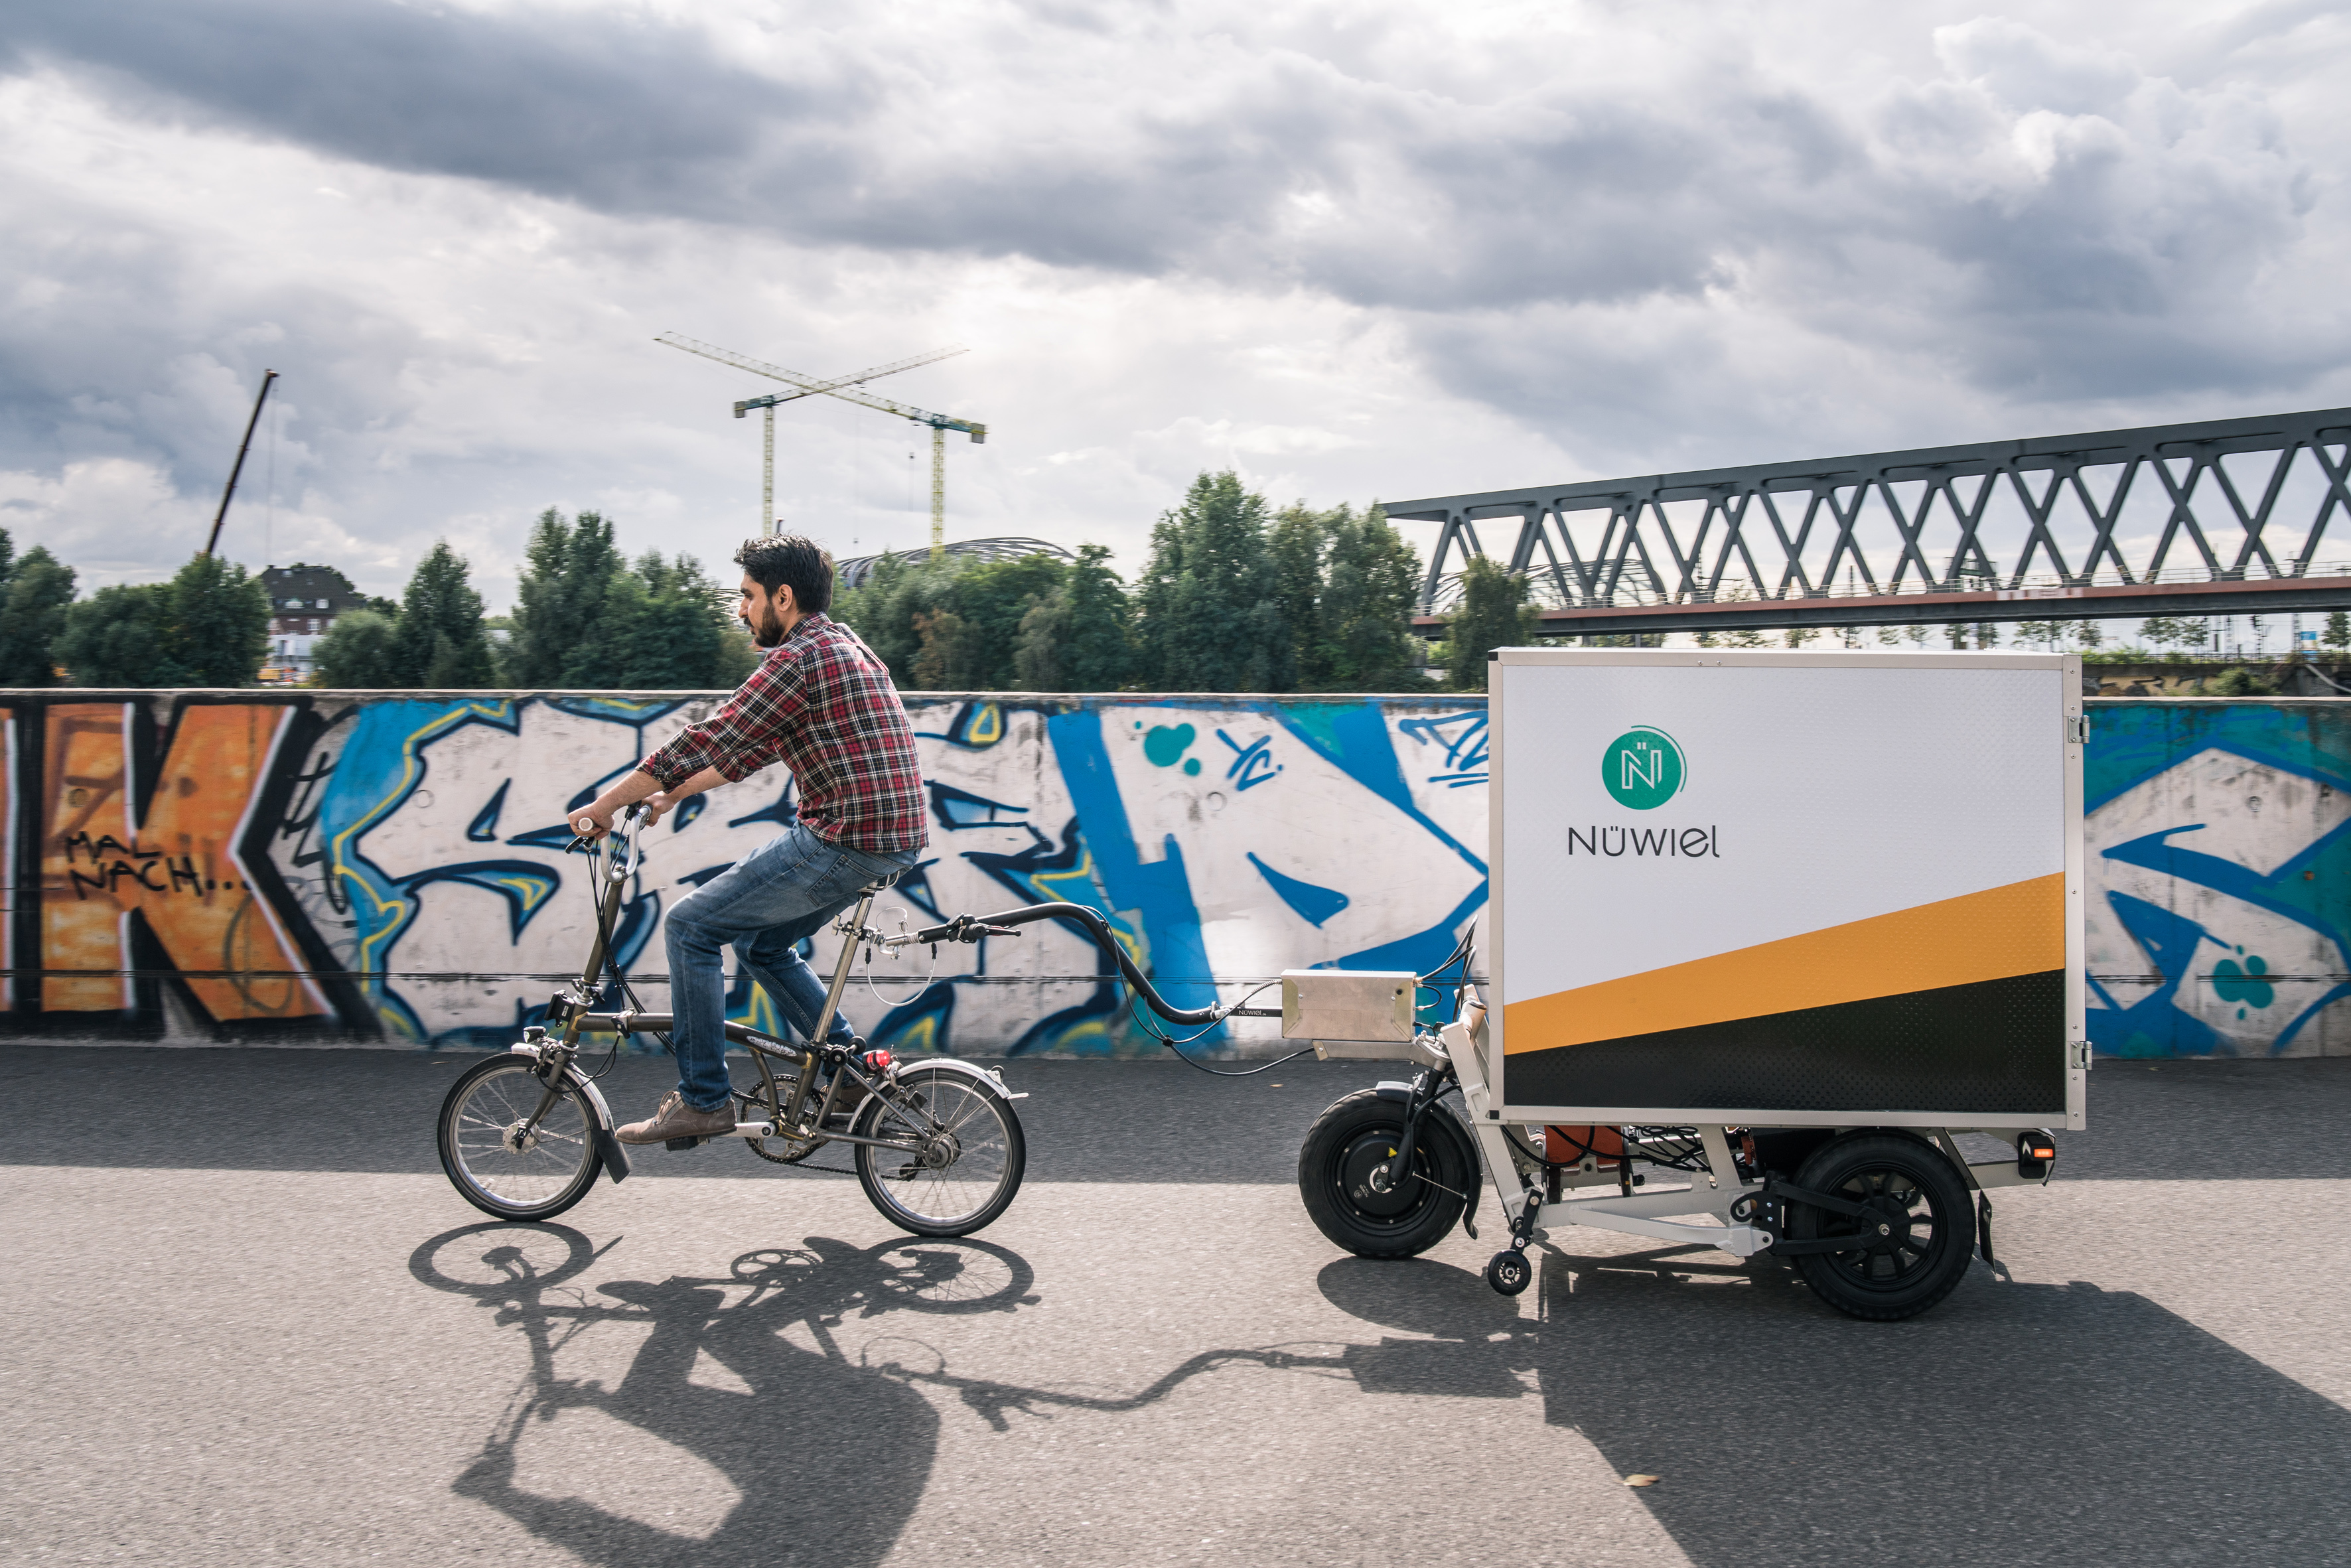 Eberspaecher partners with other mobility solution start-ups